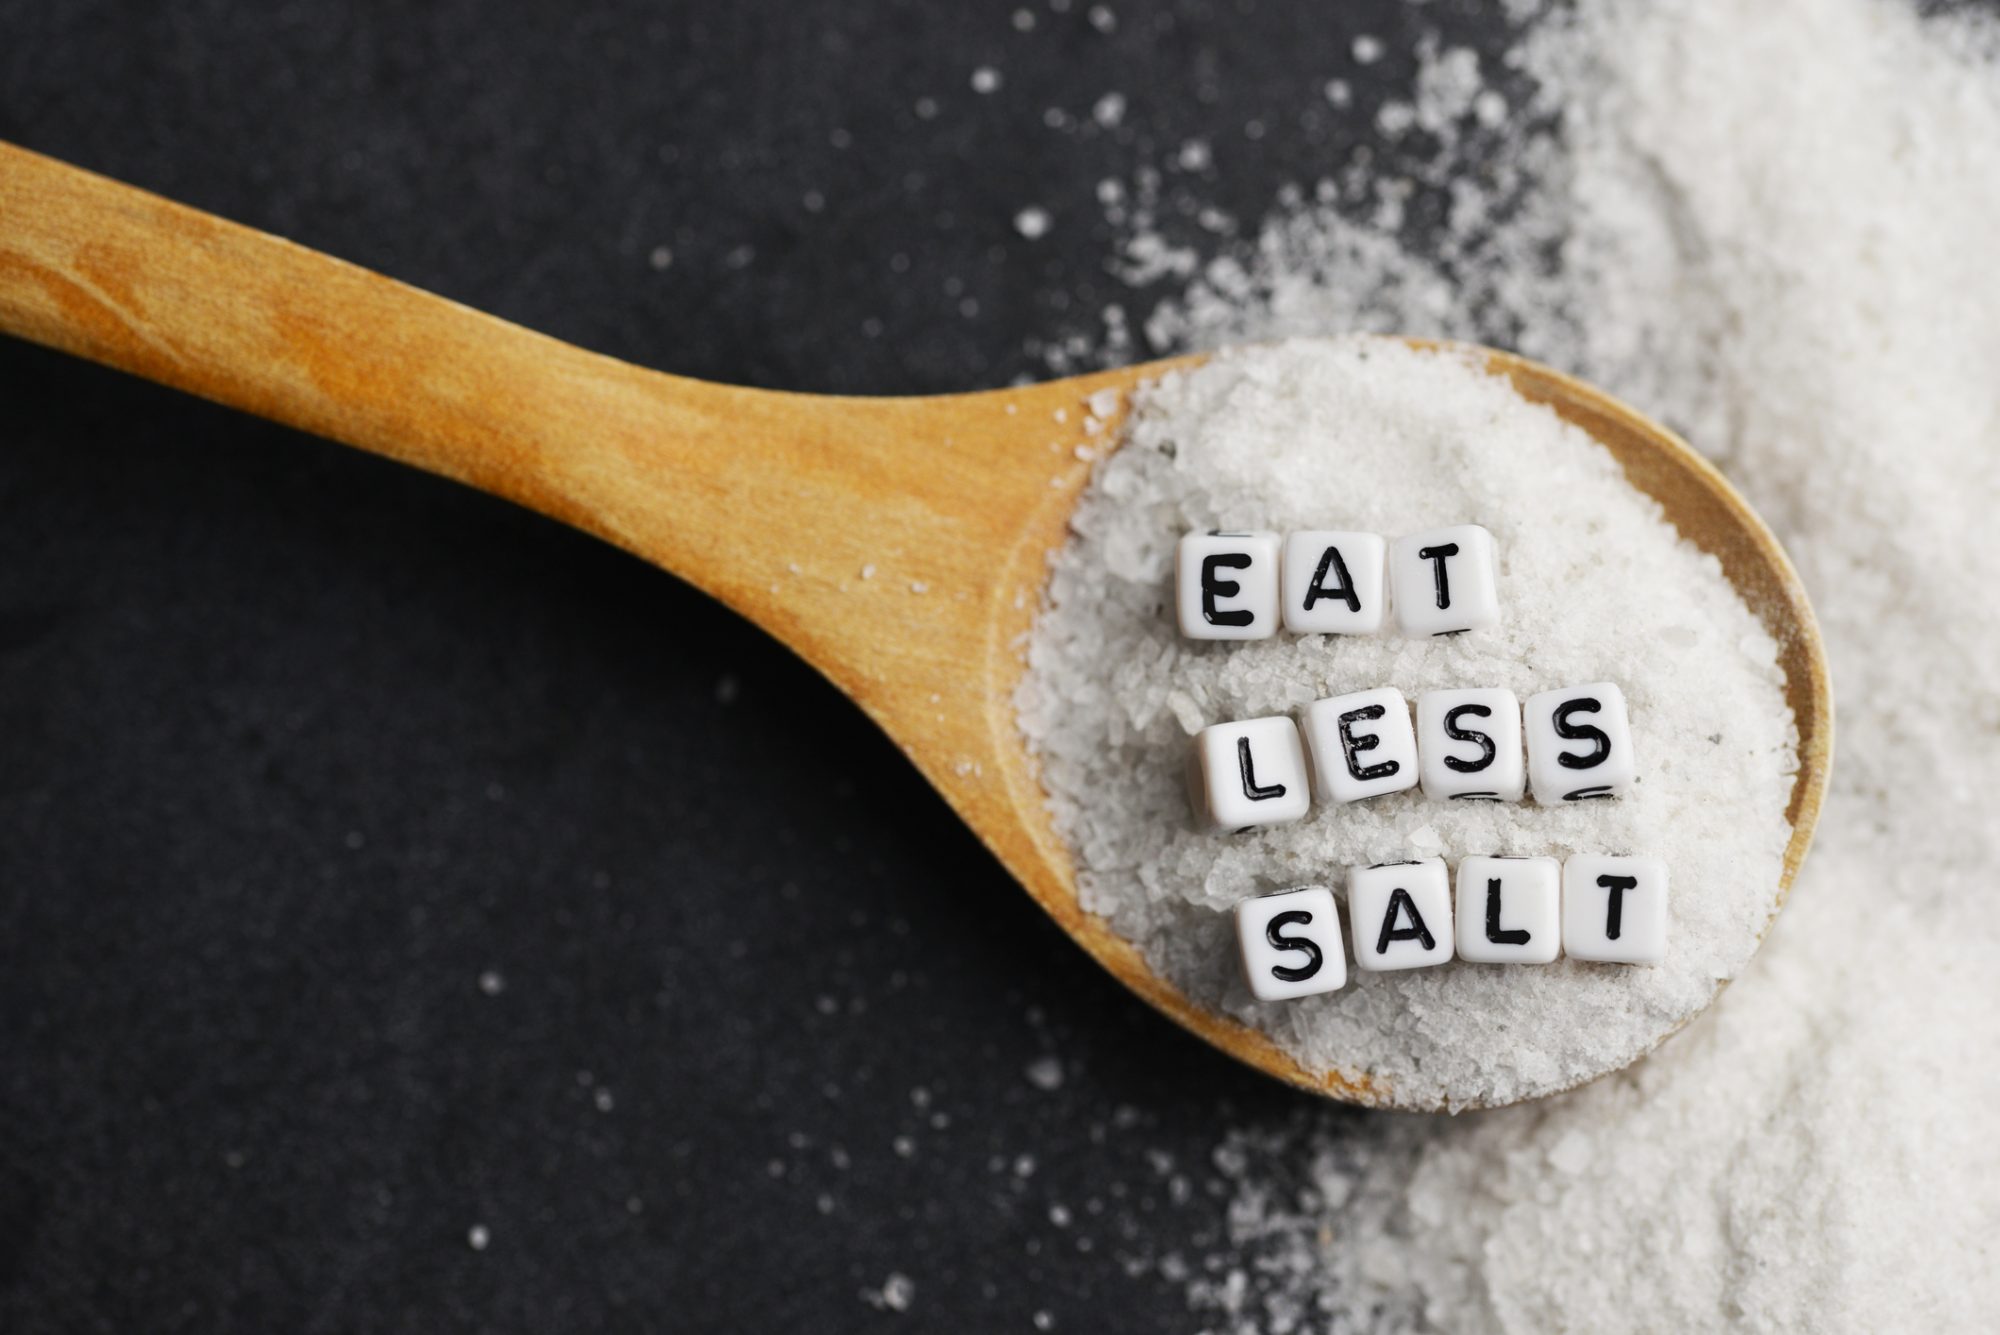 Salt reduction saves lives" - So why is it being pushed aside?